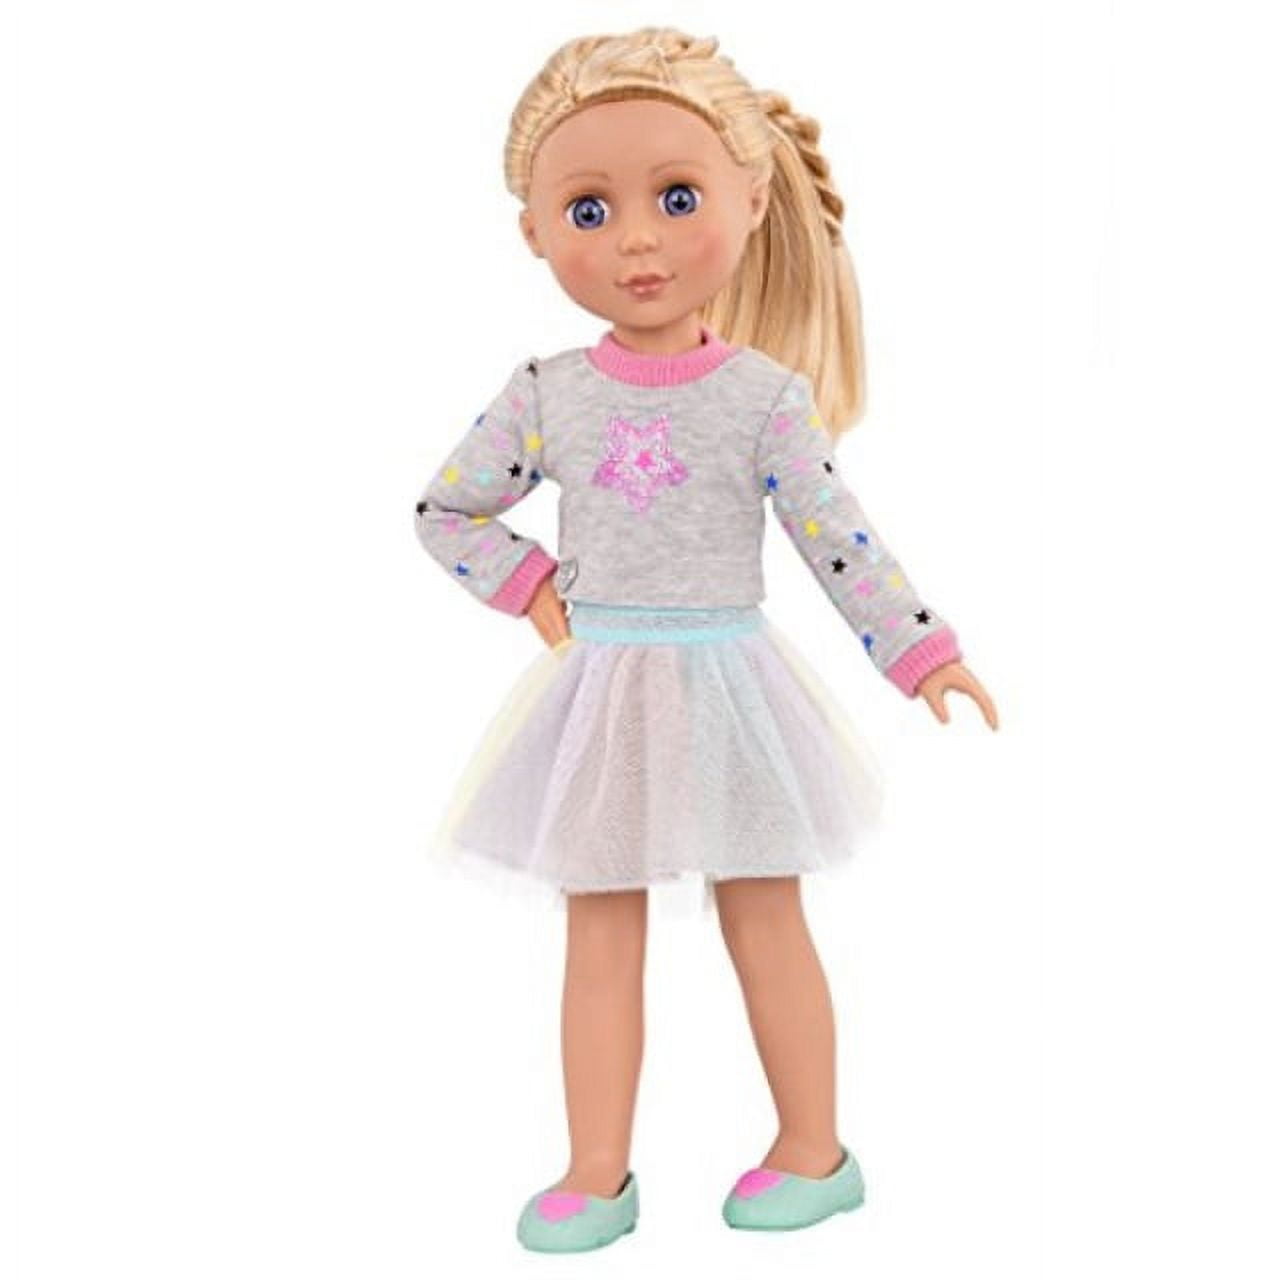 Glitter Girls by Battat - Shine Bright Outfit -14-inch Doll Clothes Toys,  Clothes and Accessories For Girls 3-Year-Old and Up 